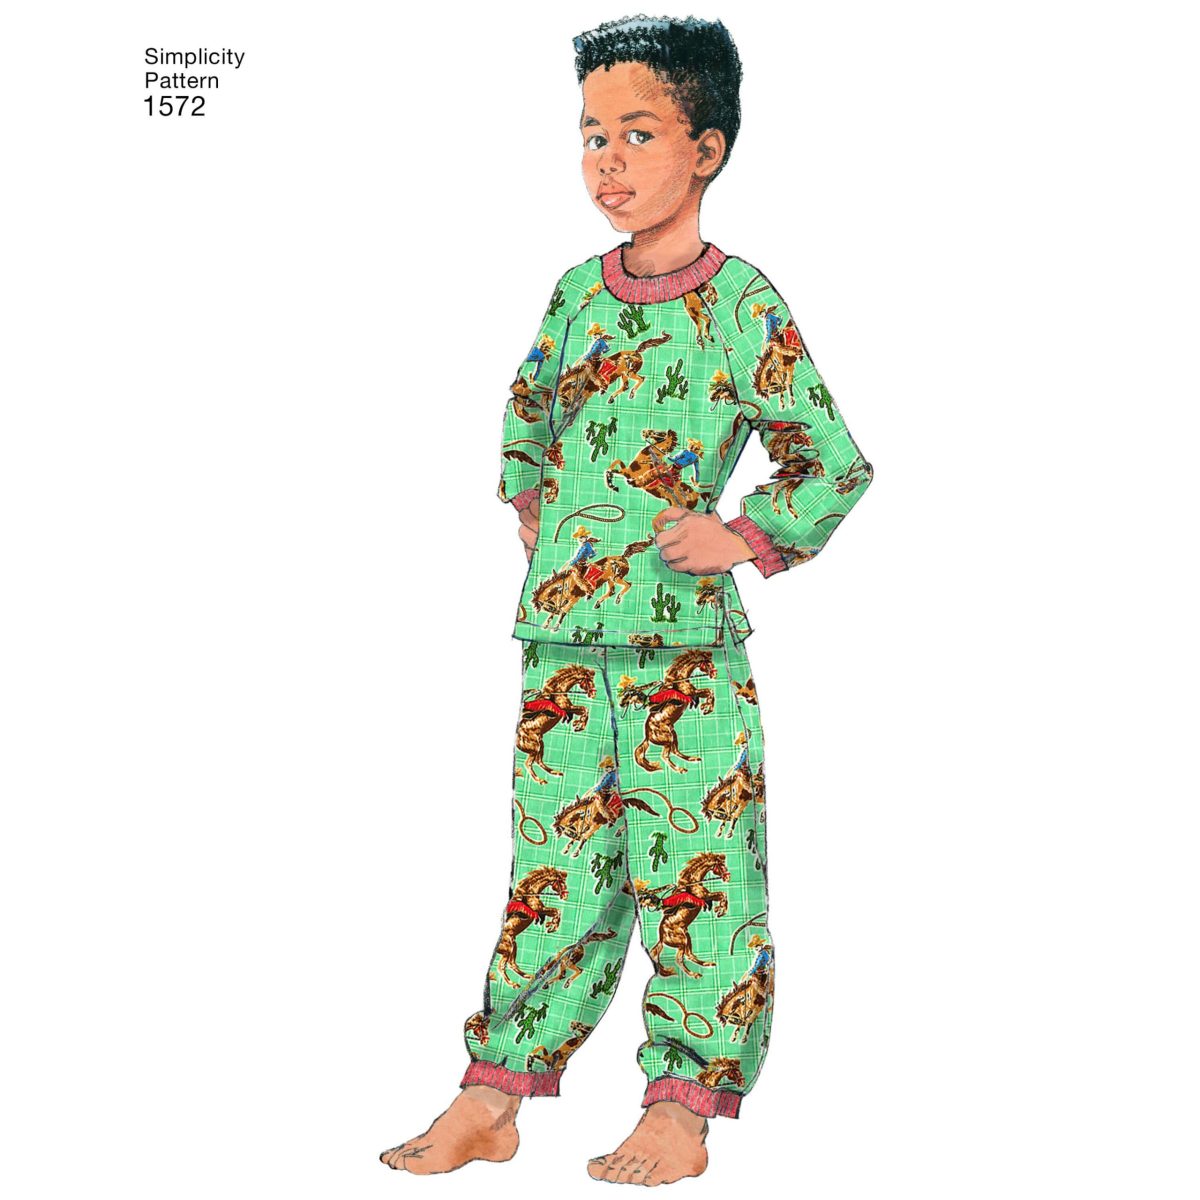 Simplicity Sewing Pattern 1572 Toddlers' and Child's Sleepwear and Robe